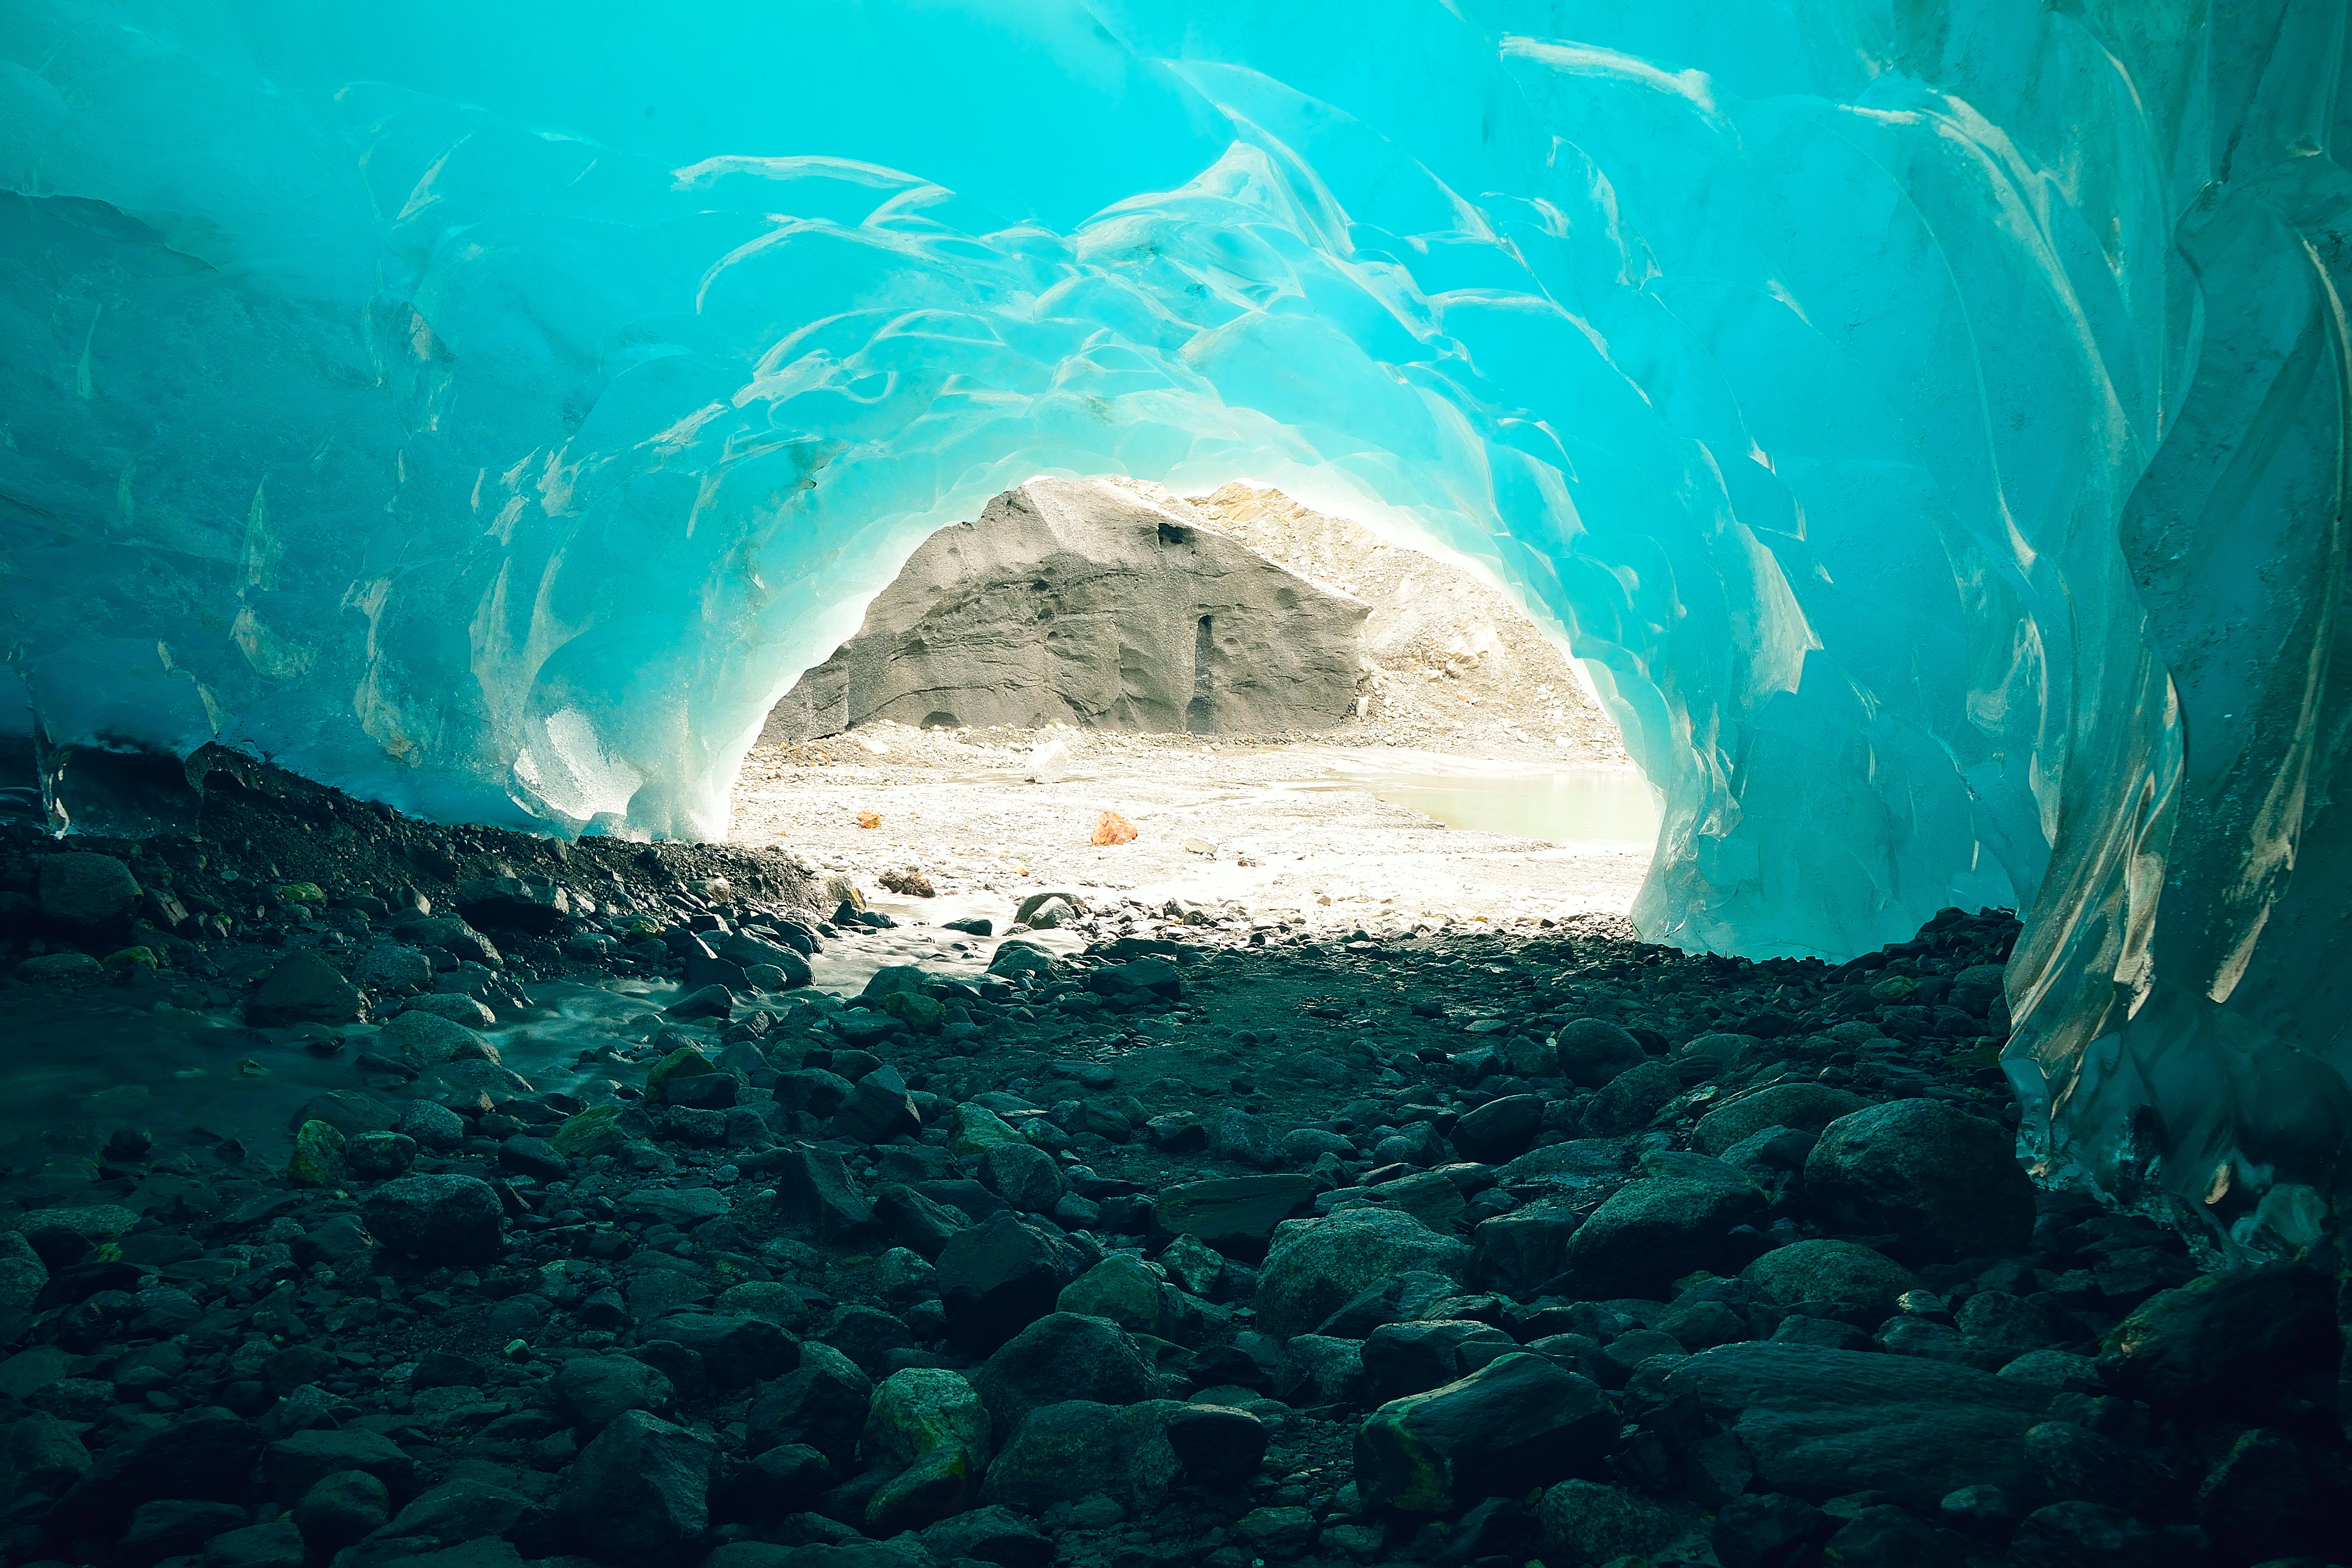 Your Chance to Walk Through These Gorgeous Glacier Caves May Not Last, Travel and Exploration